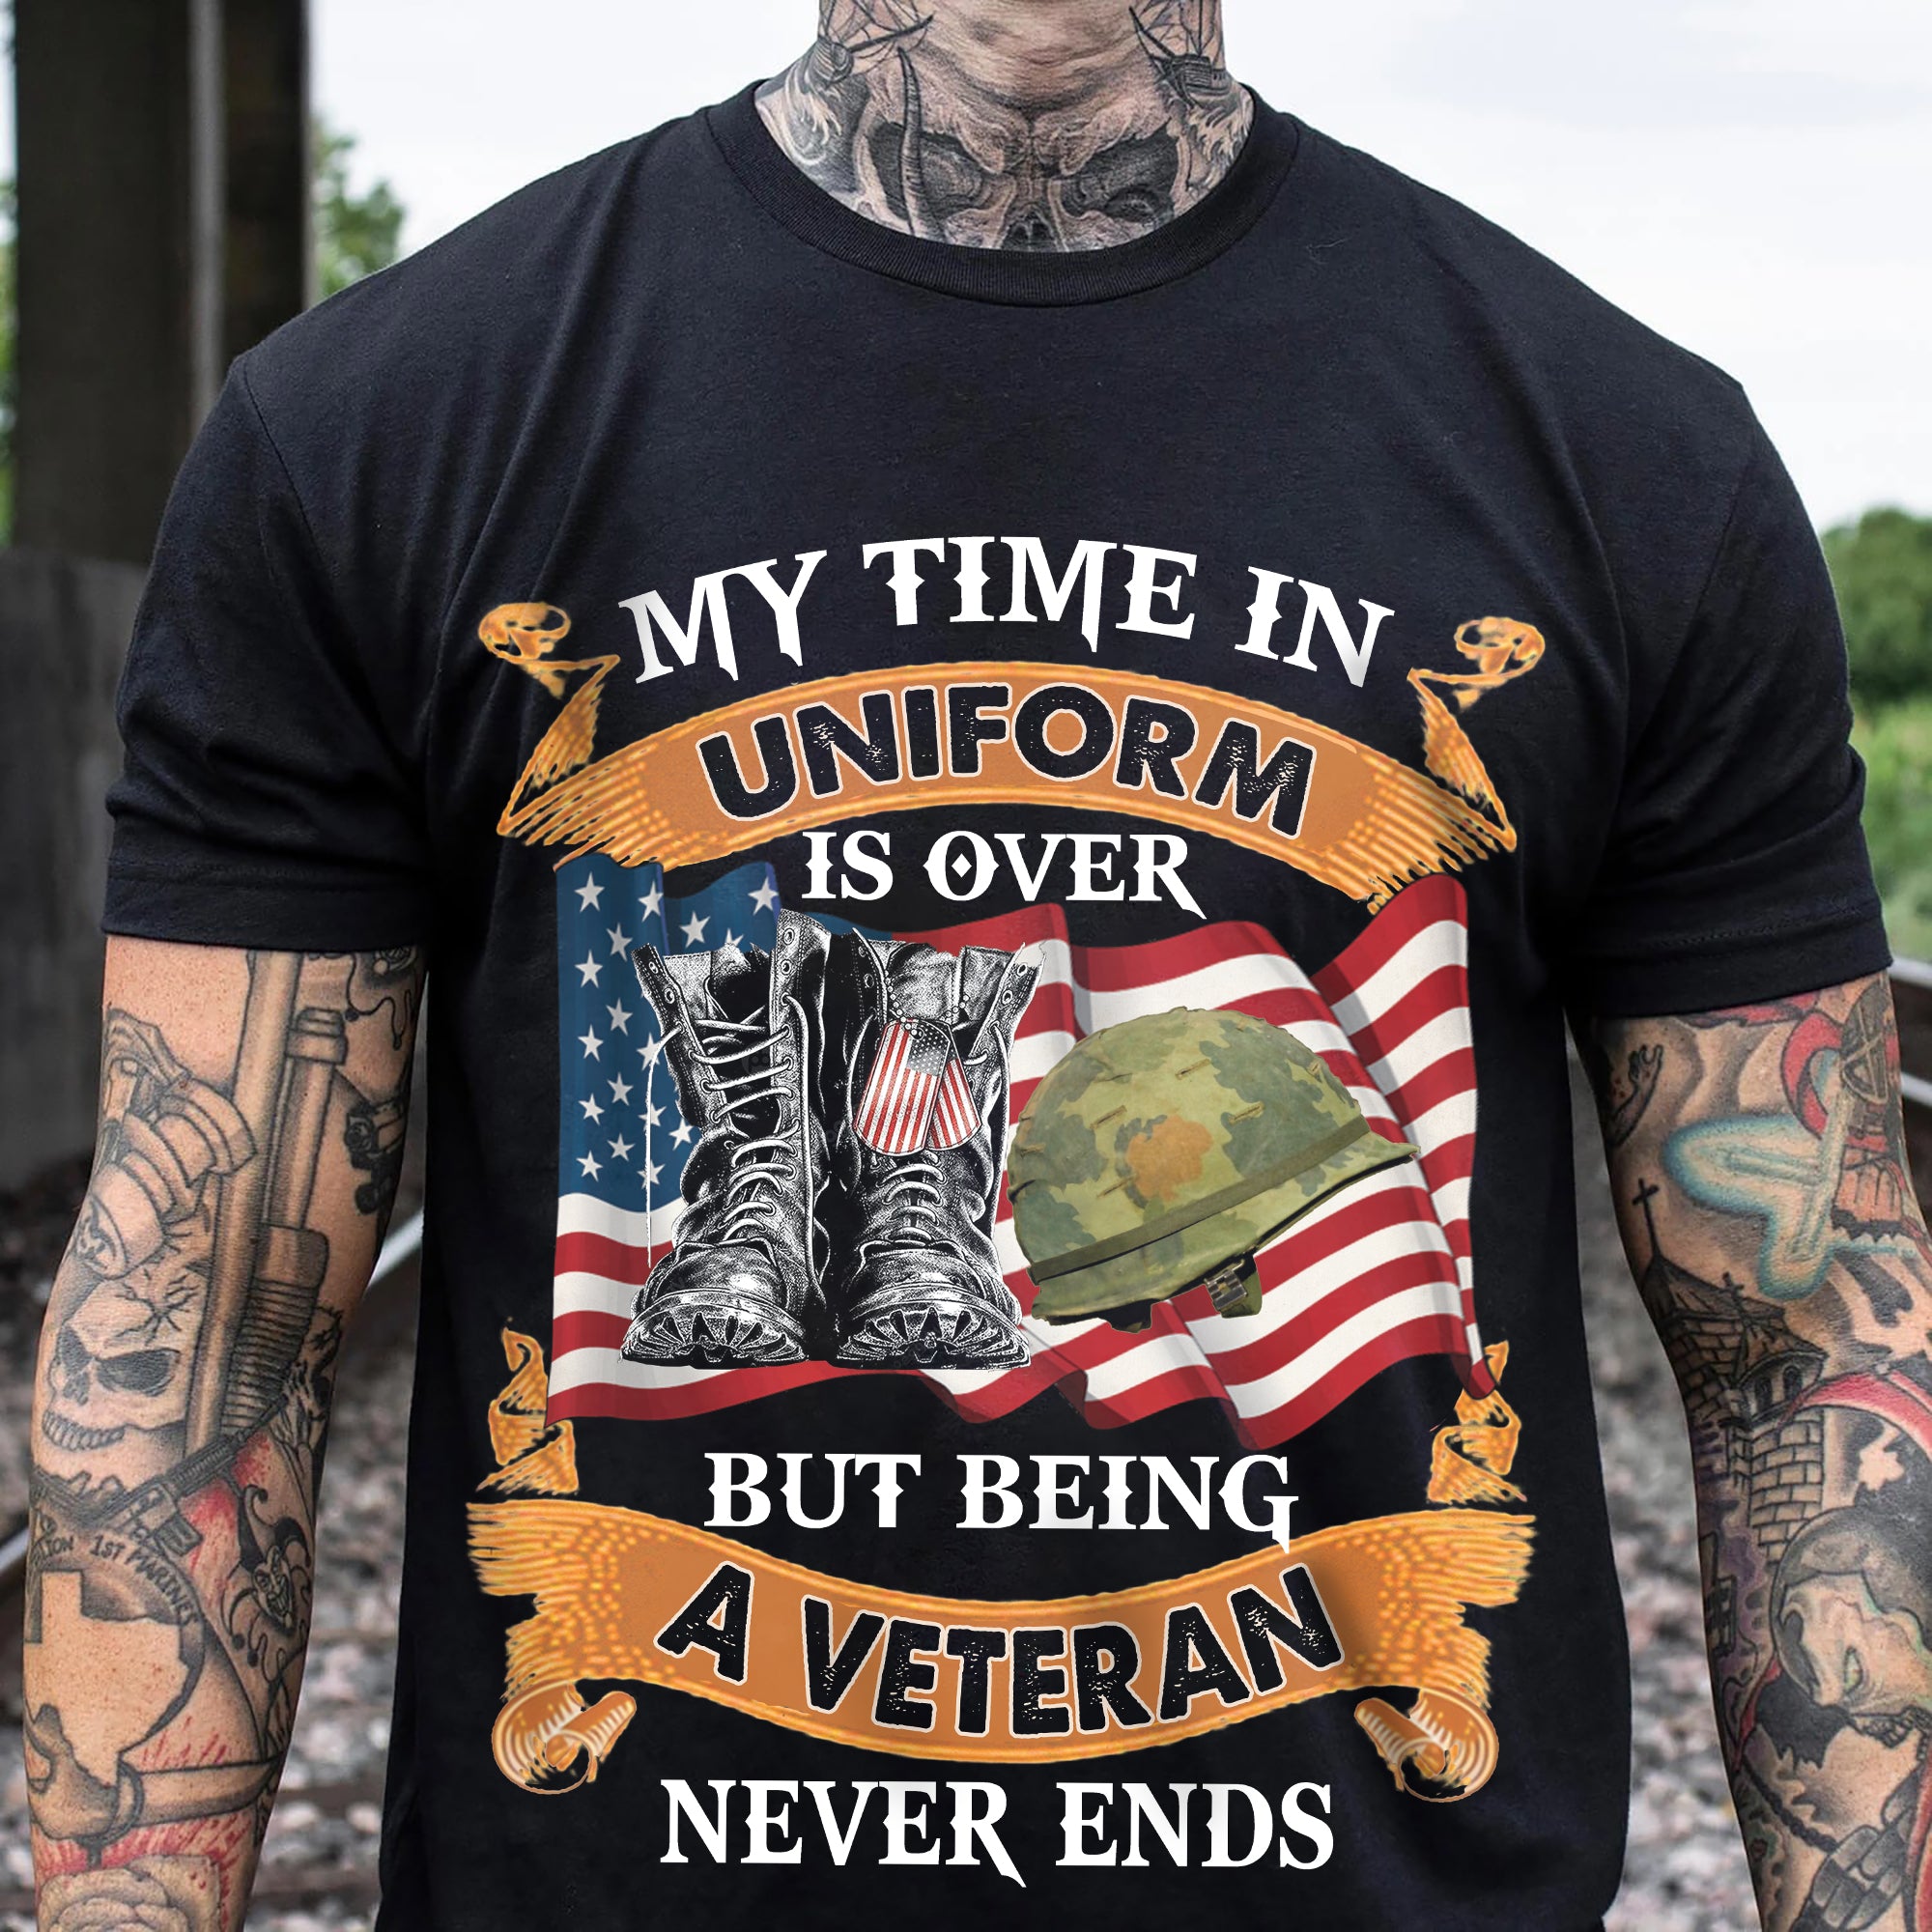 MY TIME IN UNIFORM IS OVER BUT BEING A VETERAN NEVER ENDS T-SHIRT